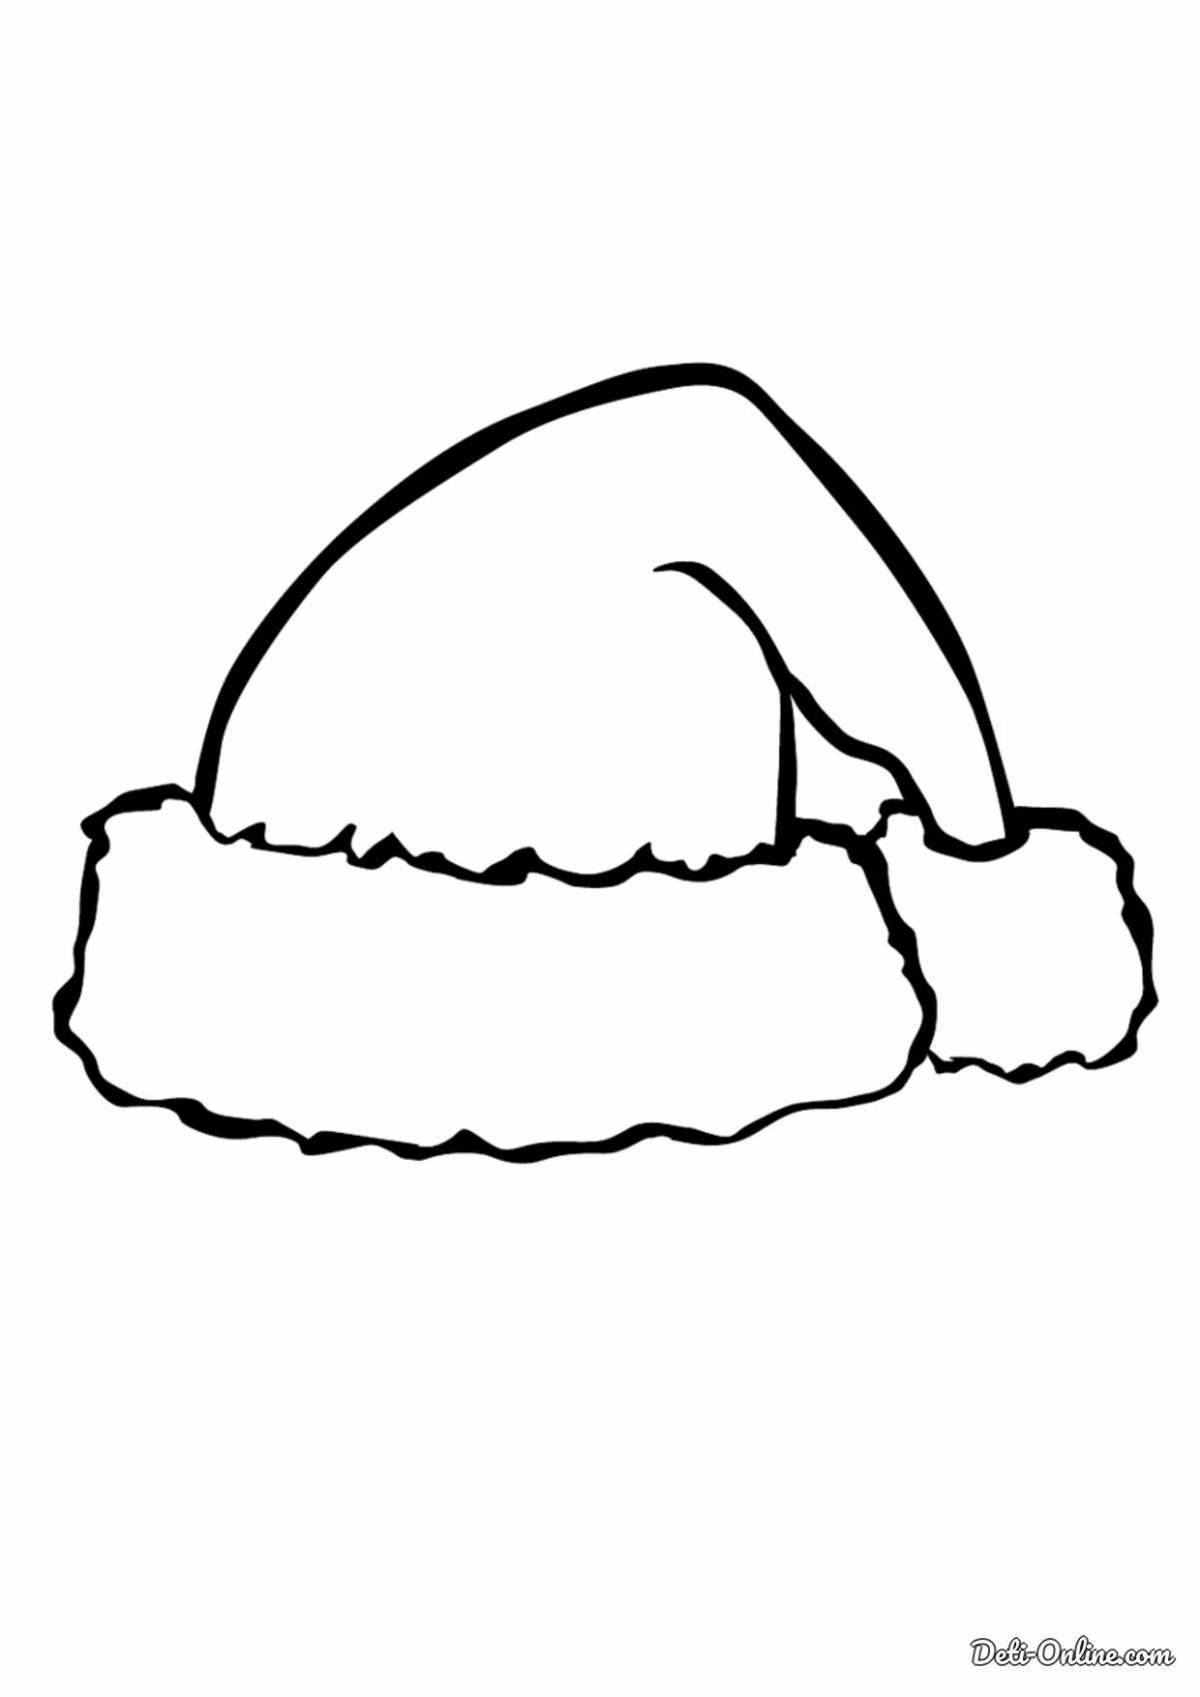 Coloring page dazzling santa claus hat for kids